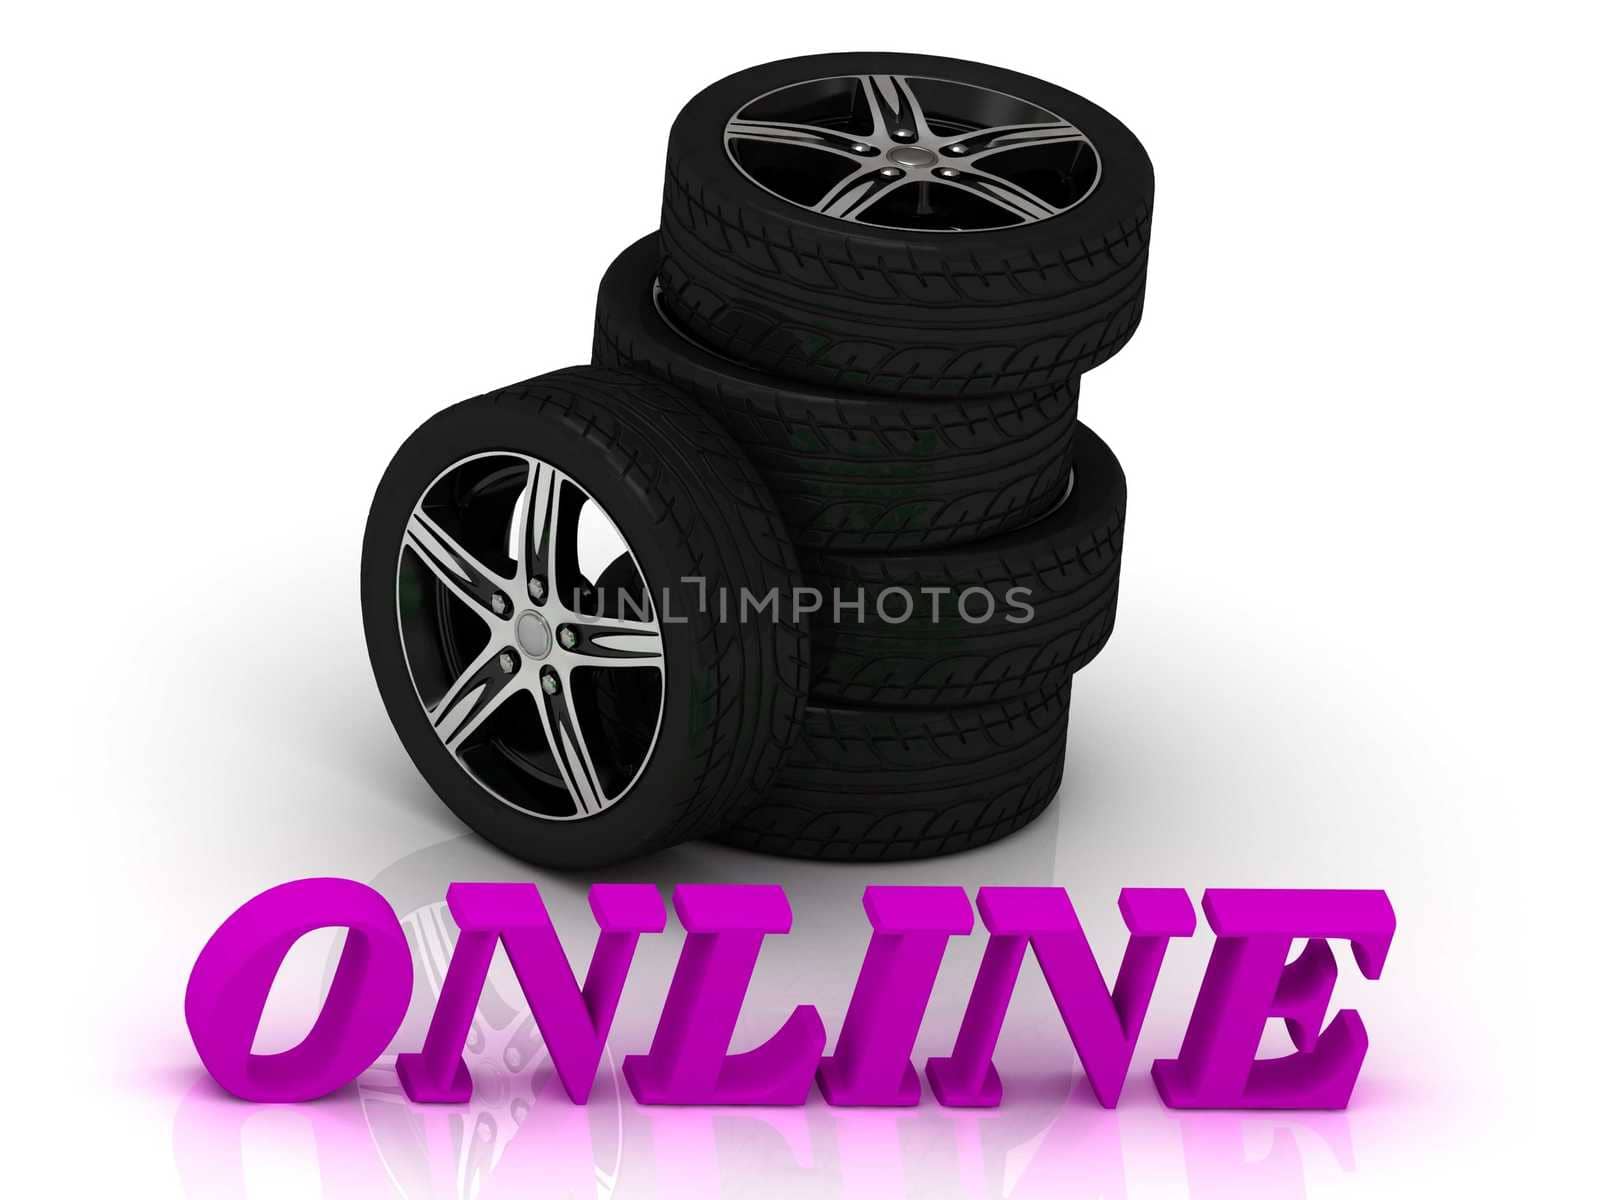 ONLINE- bright letters and rims mashine black wheels on a white background